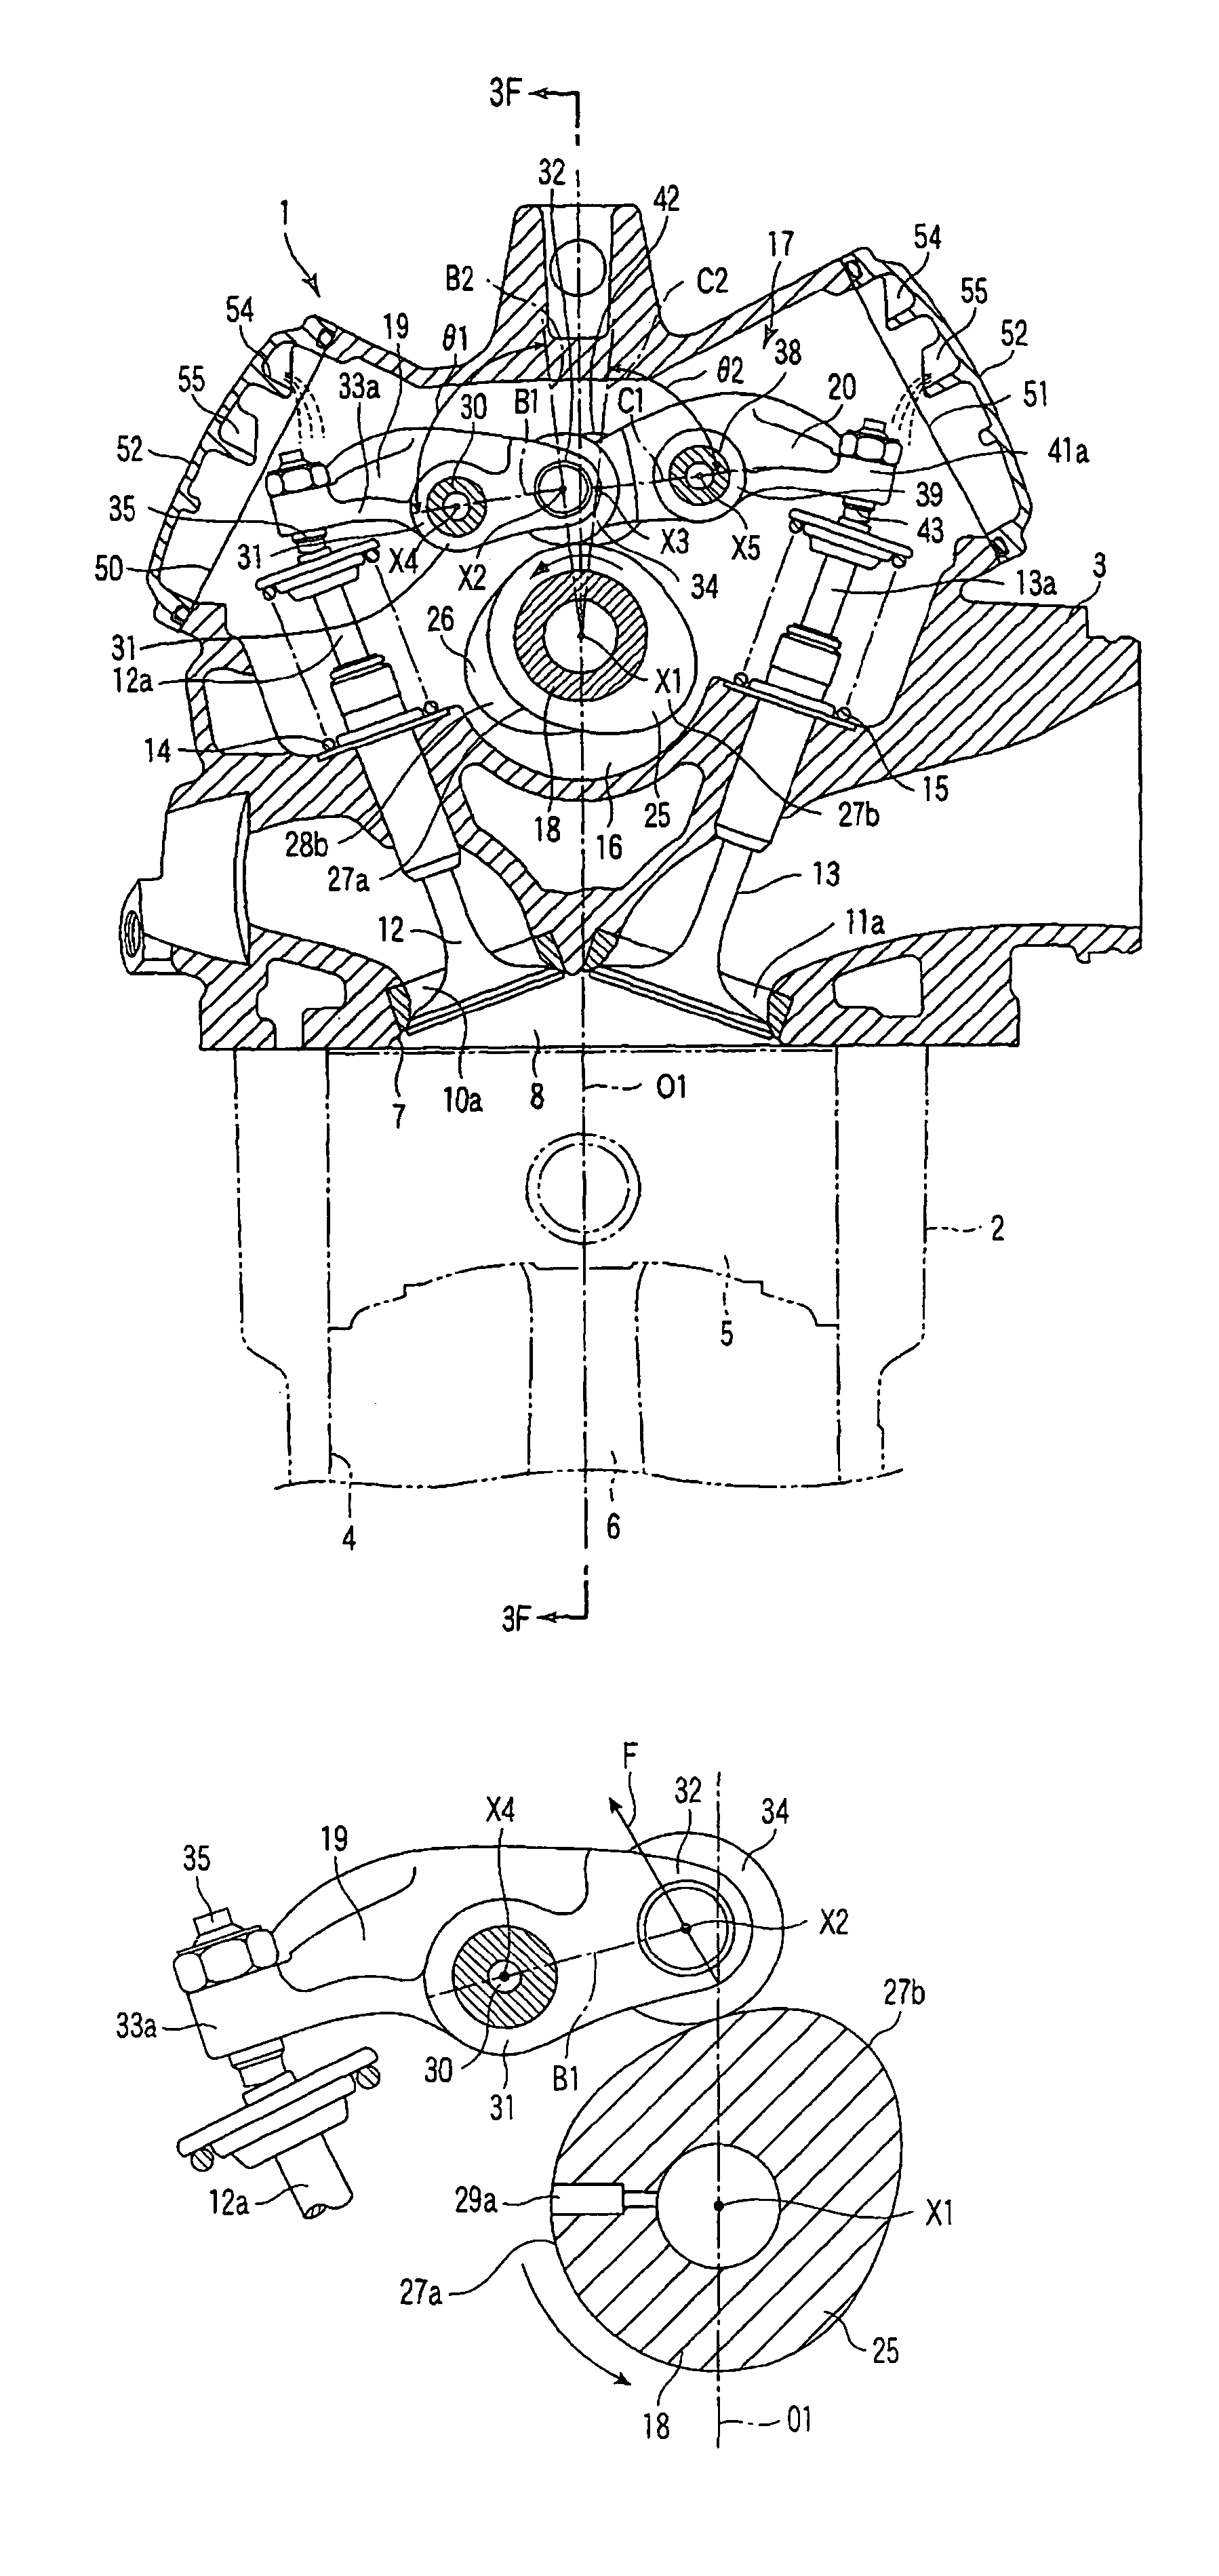 Valve operating mechanism with roller rocker arm, 4-cycle engine, and motorcycle having 4-cycle engine mounted thereon